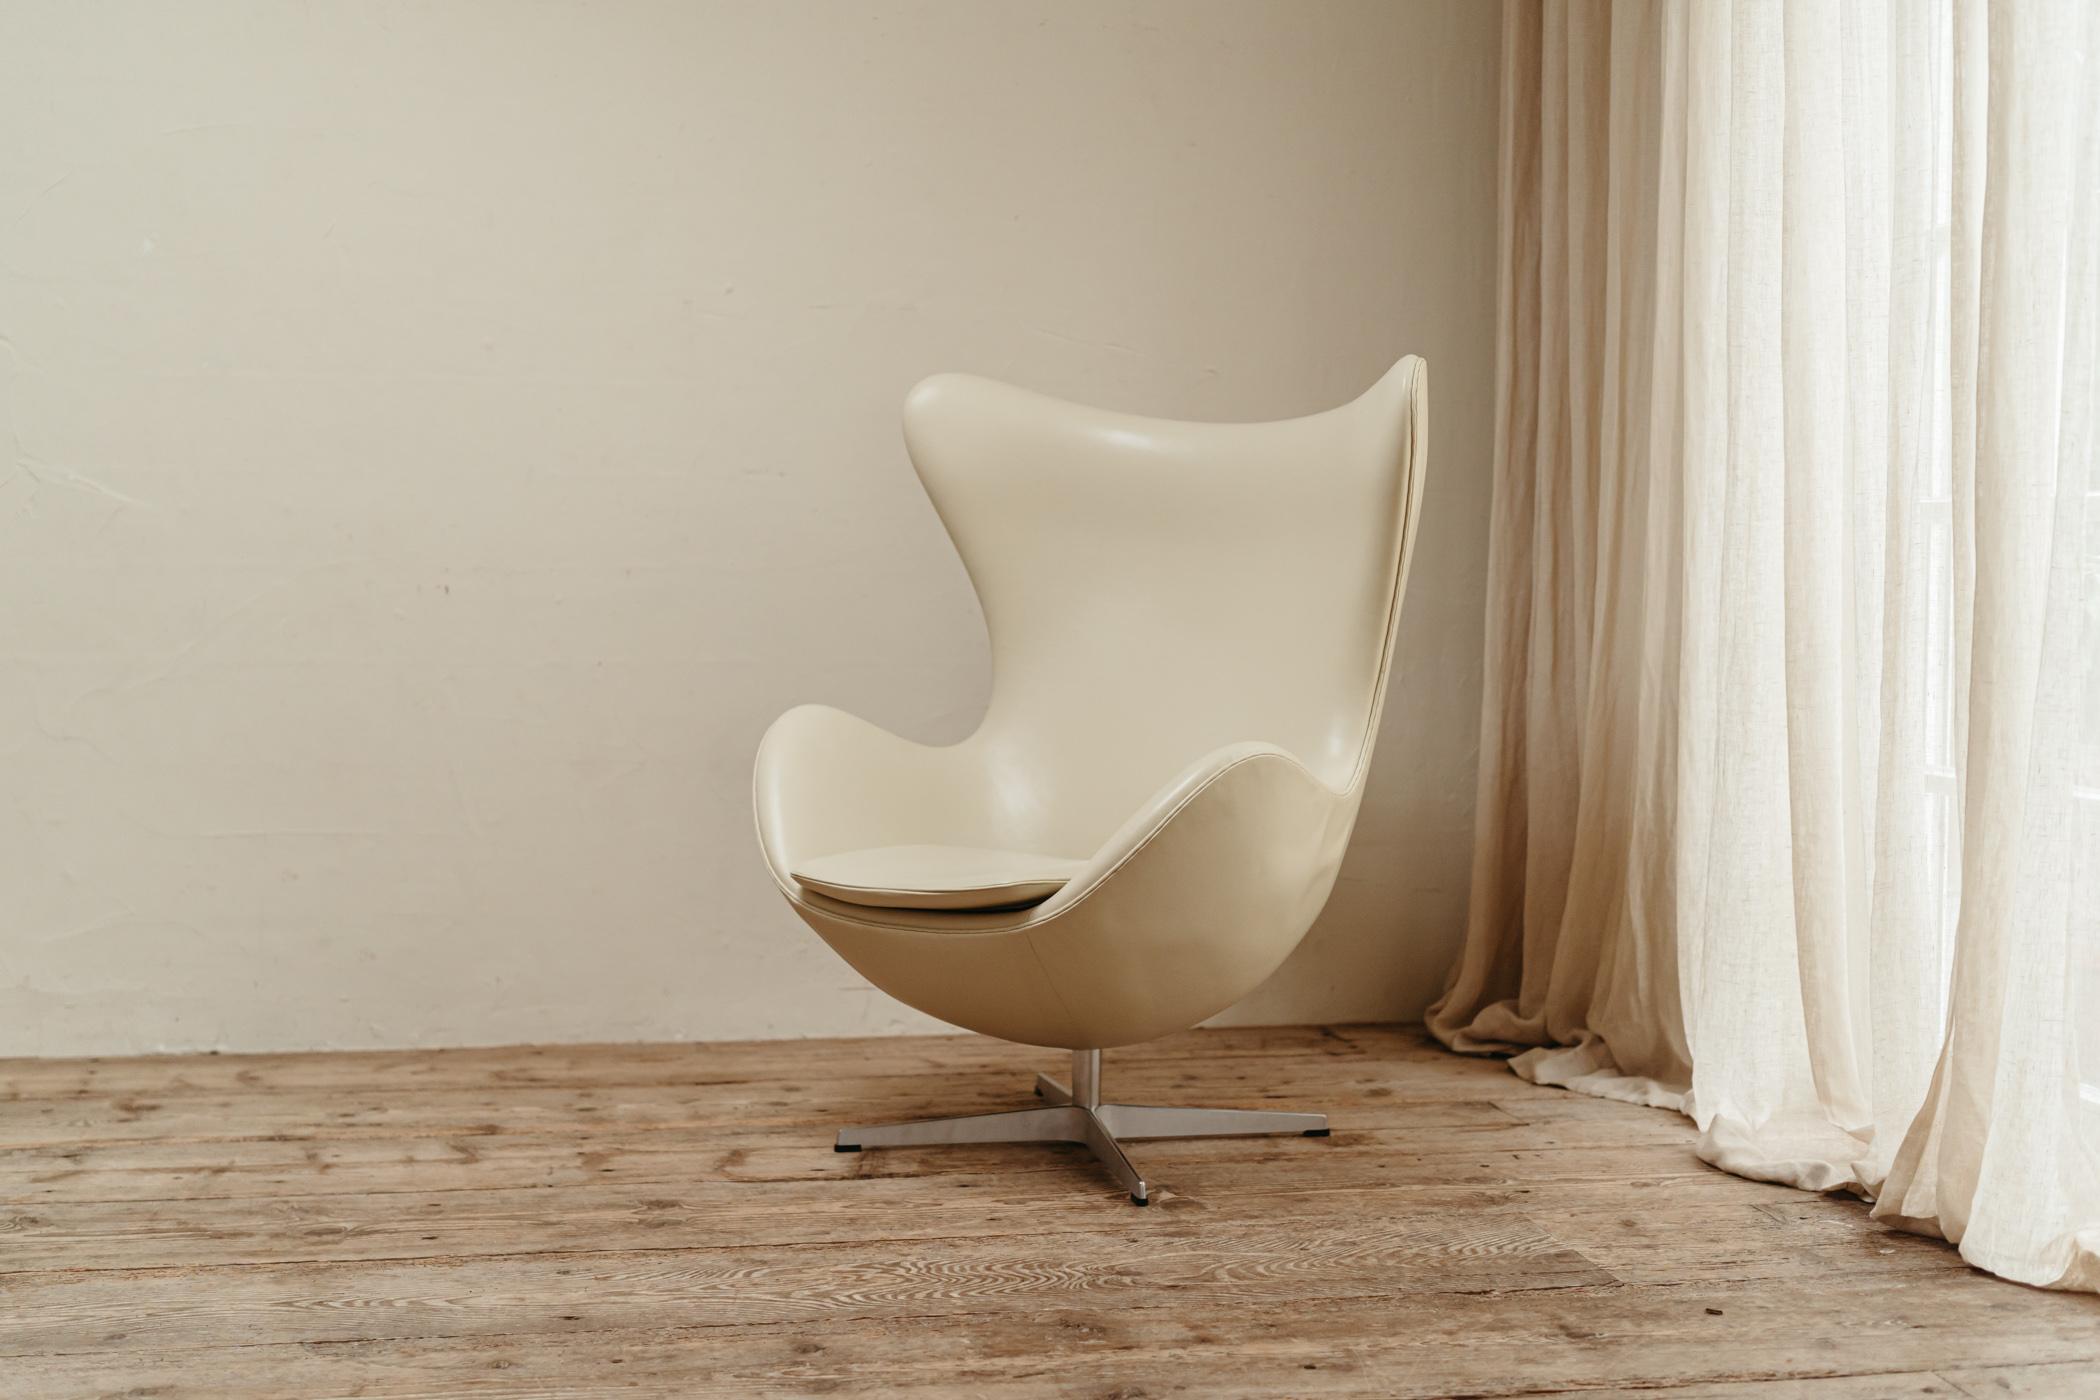 This is the Egg, model 3316, designed by Arne Jacobsen and manufactured by Fritz Hansen. the chair has new upholstery in offwhite leather, in very good condition.